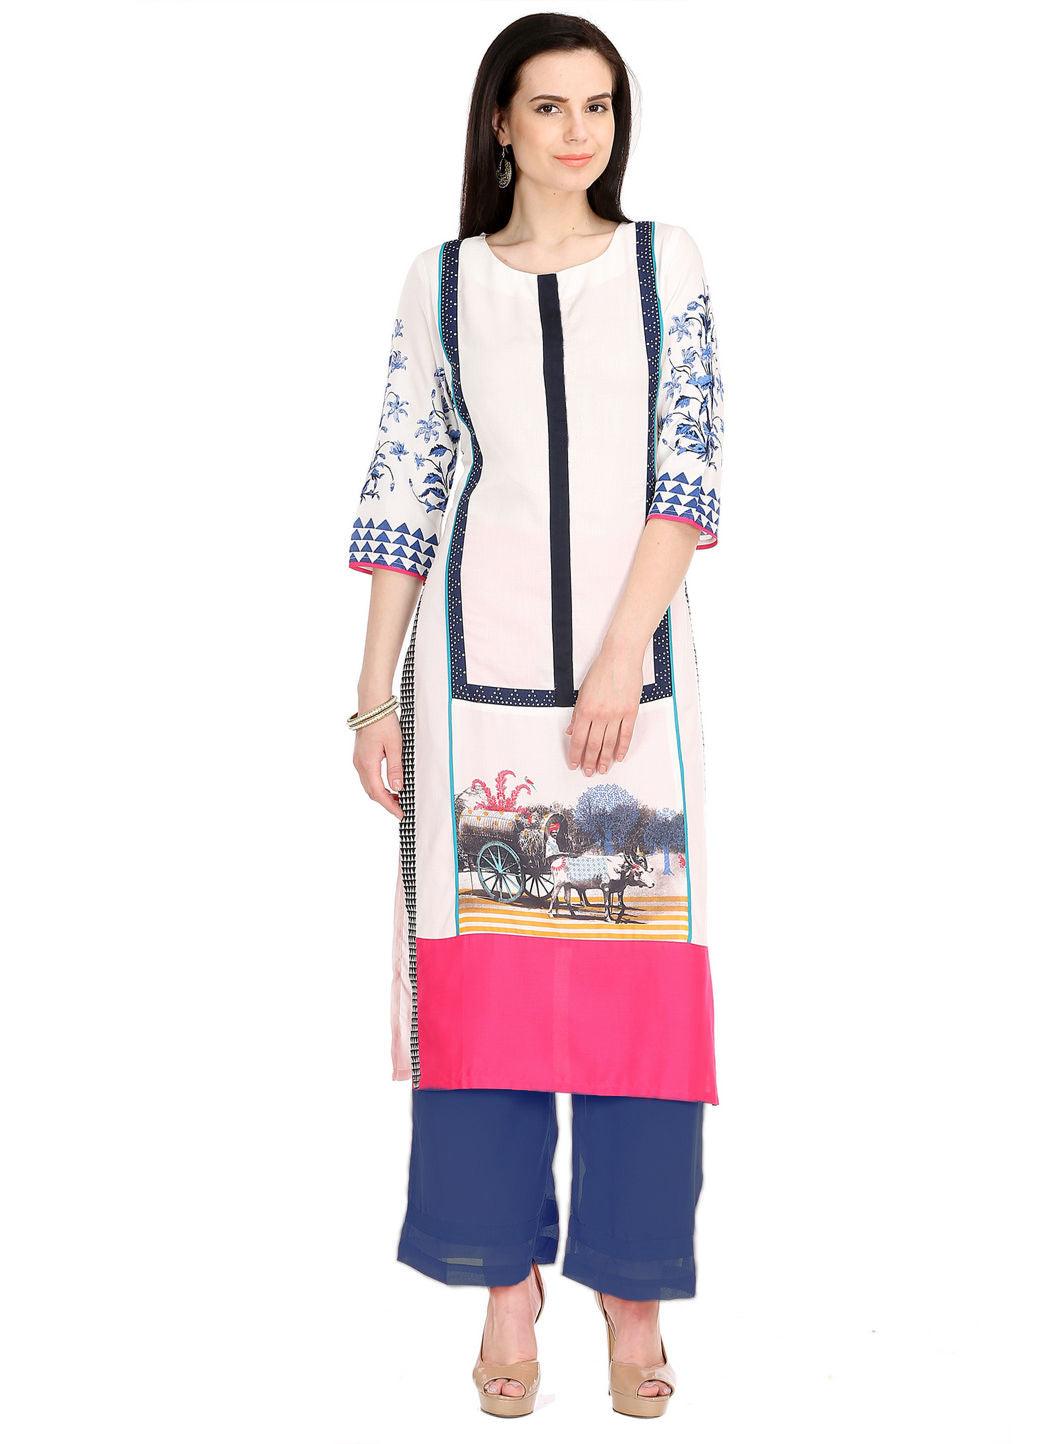 Wonderful White Color Printed Long Casual Kurti by Qivii